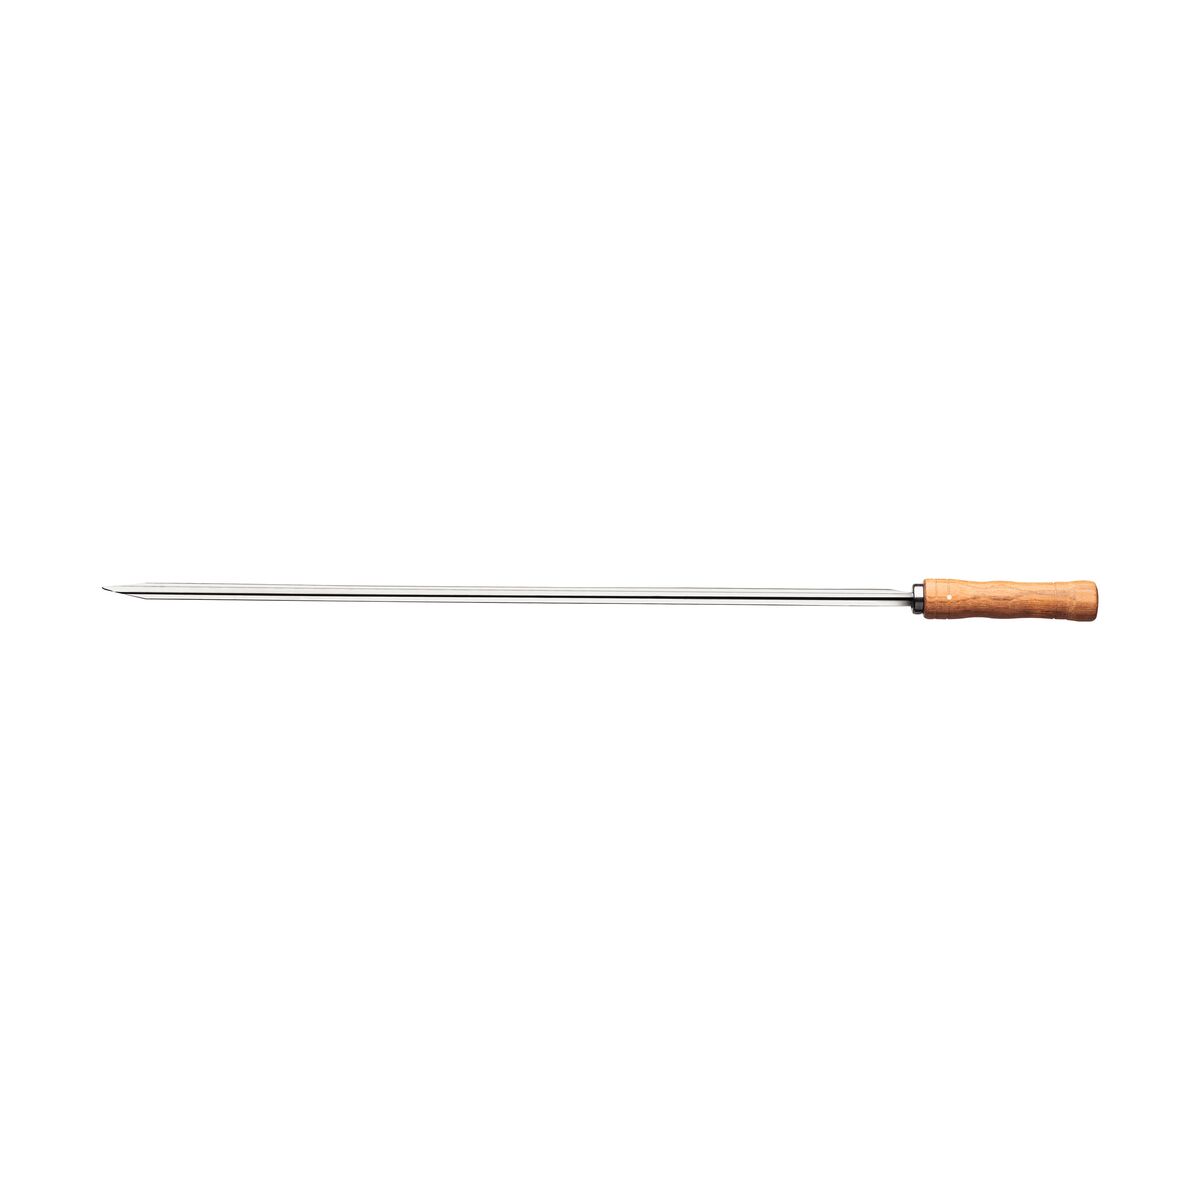 Tramontina Barbecue Skewer with Stainless-Steel Prong and Wood Handle, 85 cm